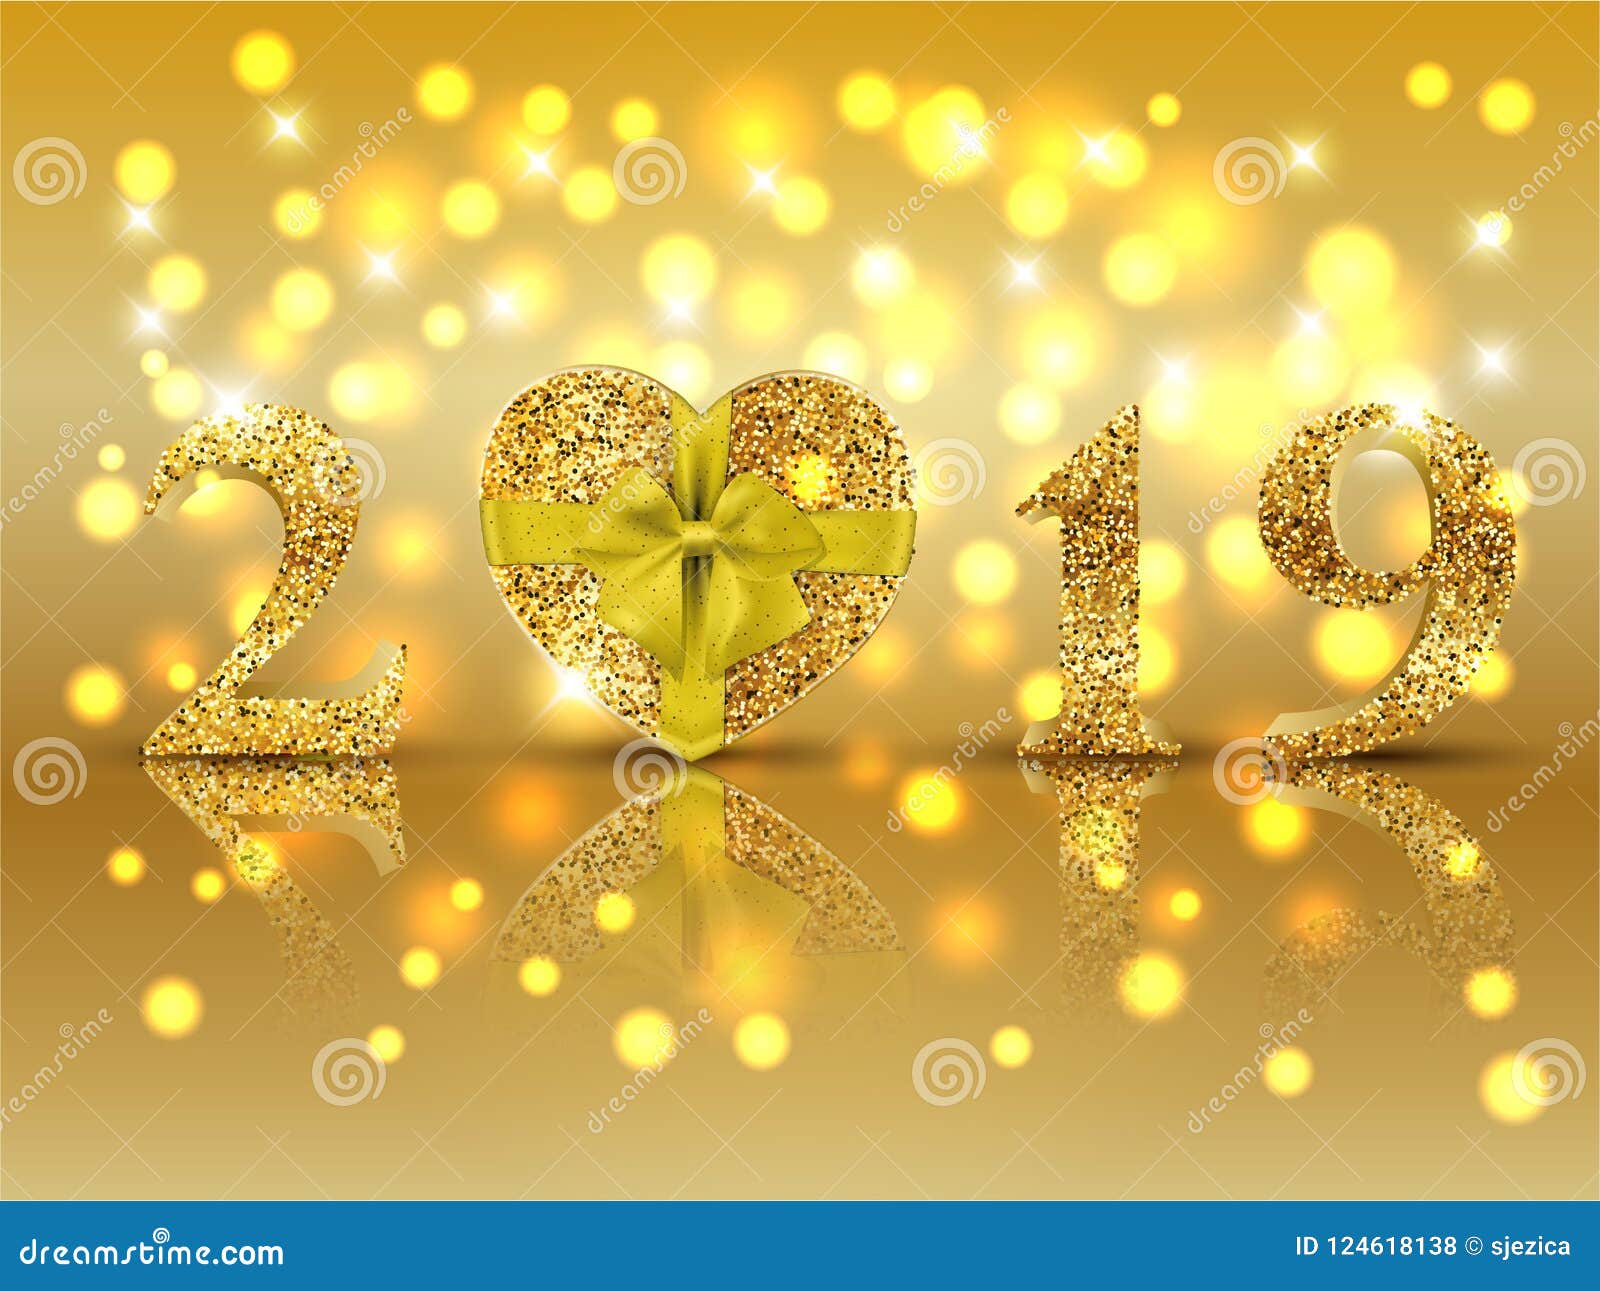 Royalty Free Stock Download New Year Holiday Background With Gold Glitter Numbers 2019 And Present Stock Vector Illustration